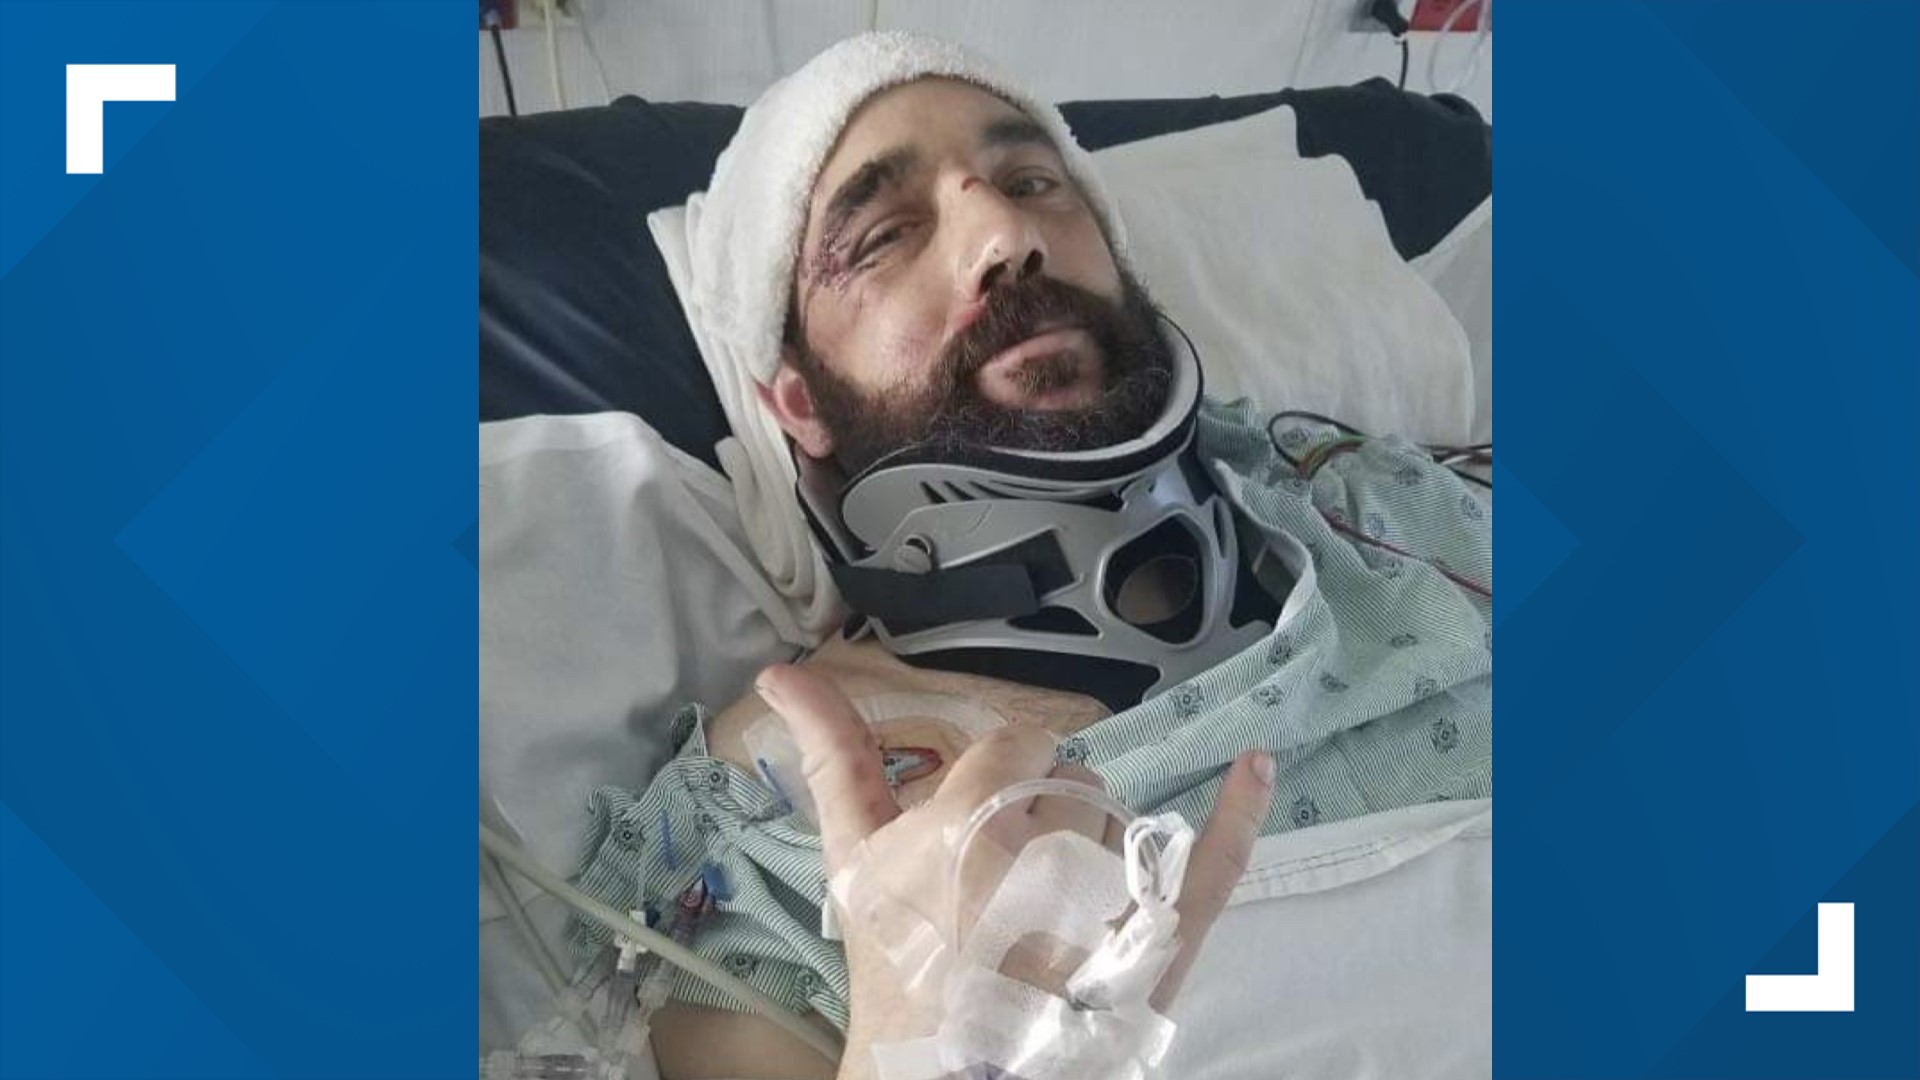 Josh Graff was seriously injured while running out to a crash on Jackman Road Tuesday night. His friends say he has always tried to help others.